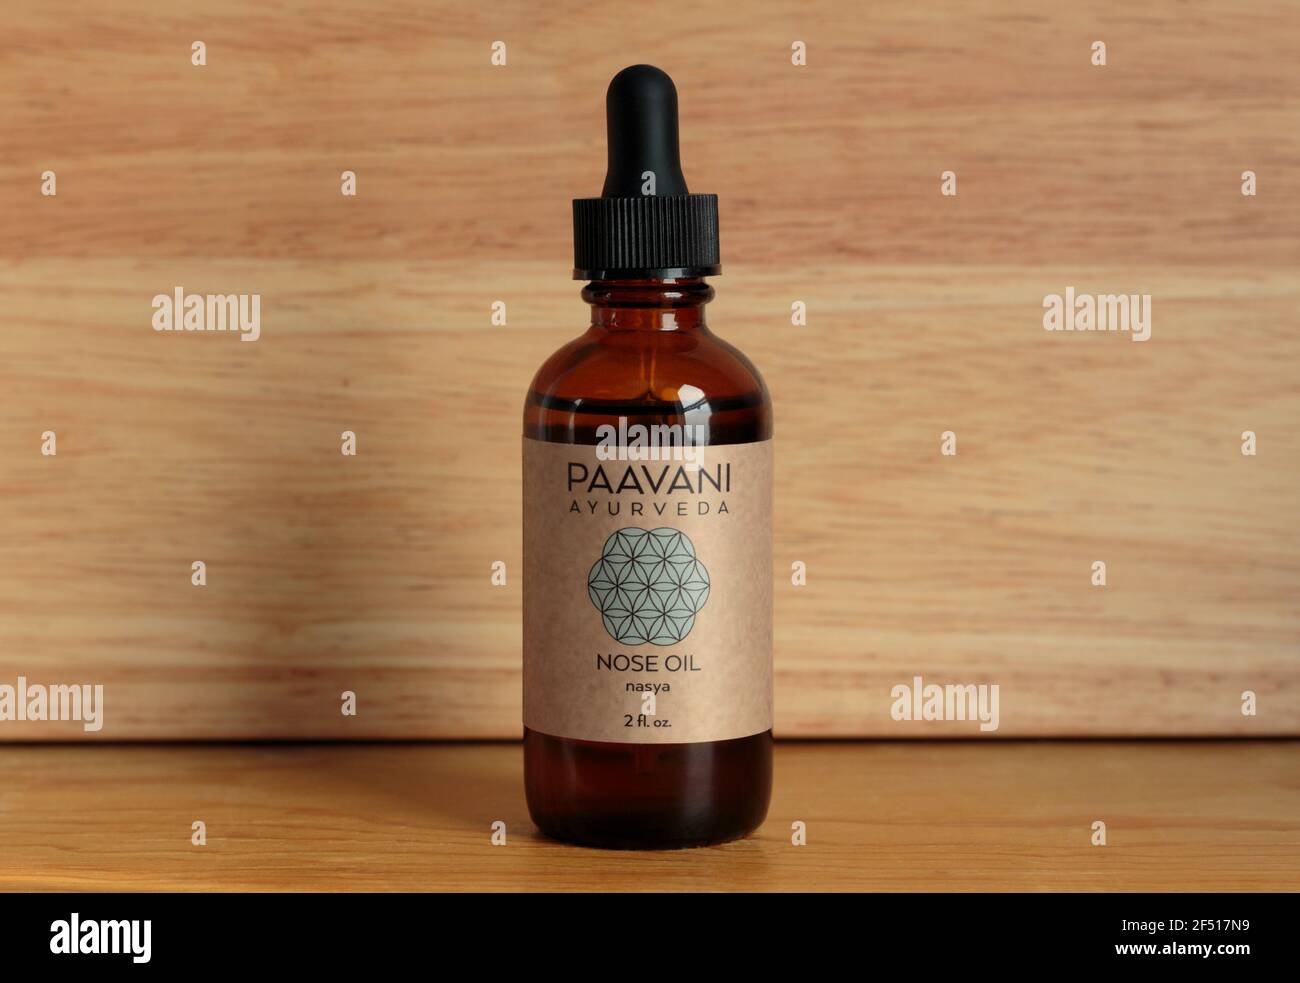 bottle of Paavani brand Ayurvedic nasya nose oil, herb-infused sesame seed oil used to lubricate and clear the nasal passages in Ayurvedic practice Stock Photo